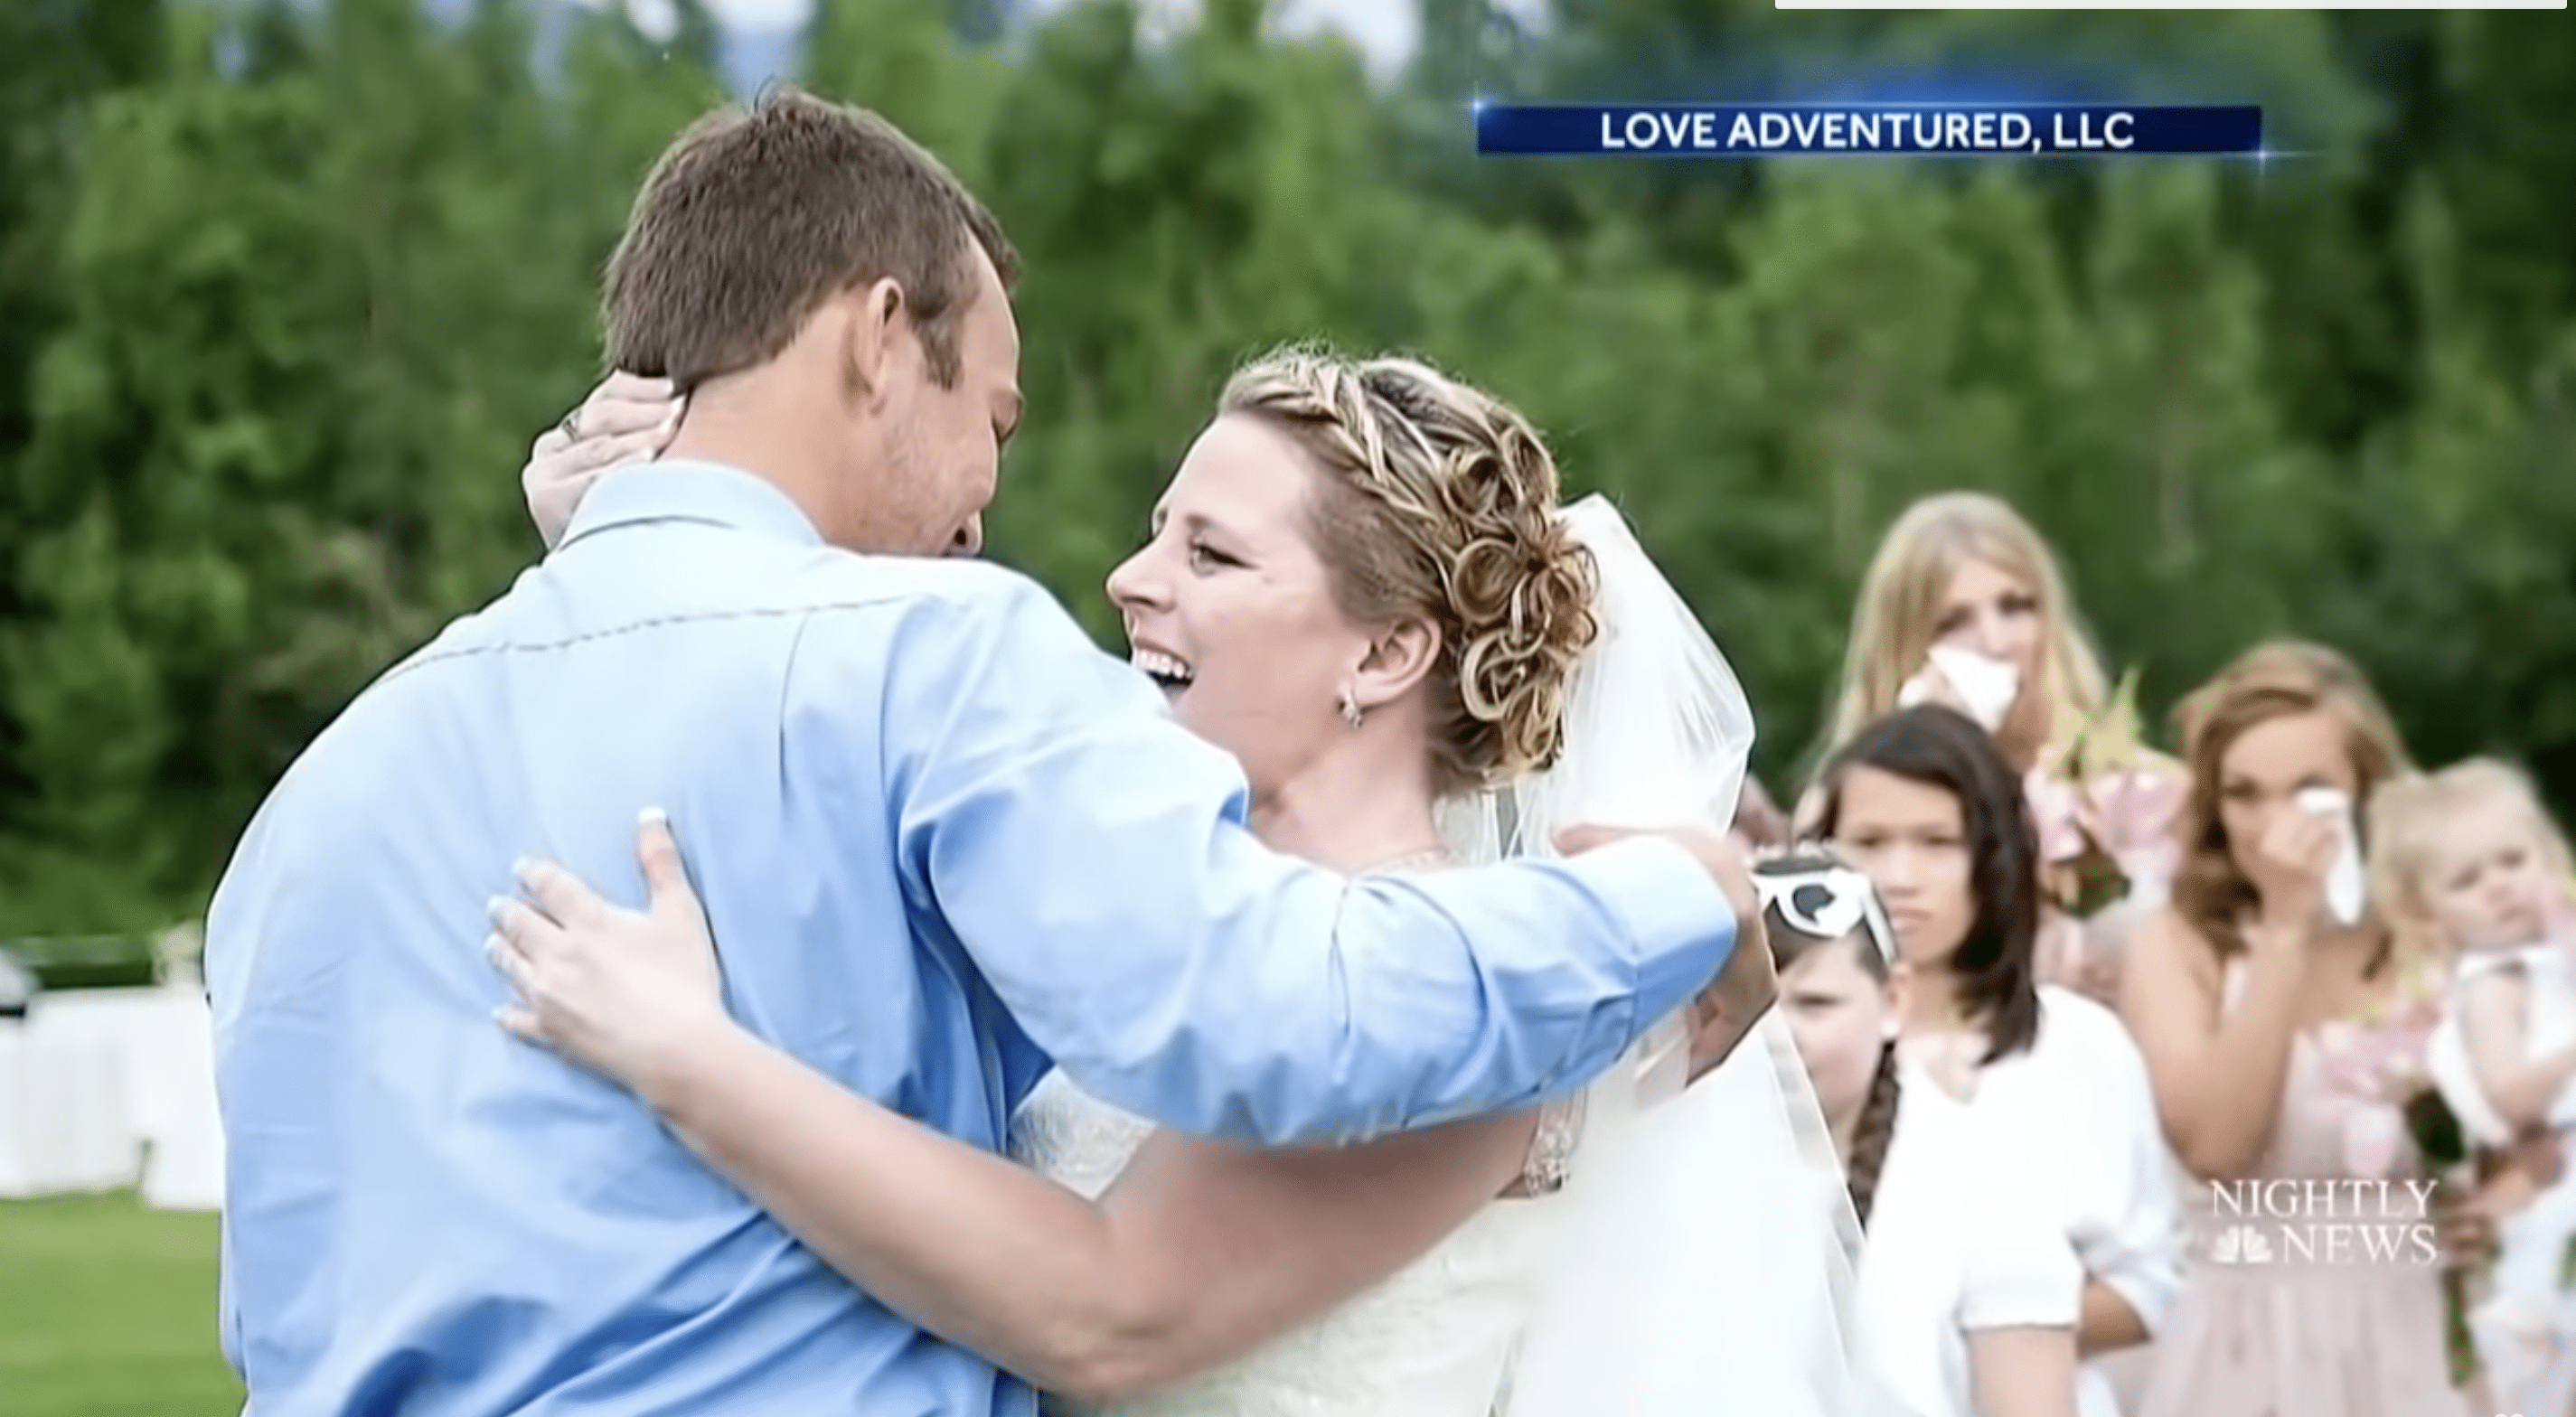 Becky Turney was shocked to see the recipient of her late son's heart, Jacob Kilby, at her wedding. | Photo: YouTube.com/NBC News